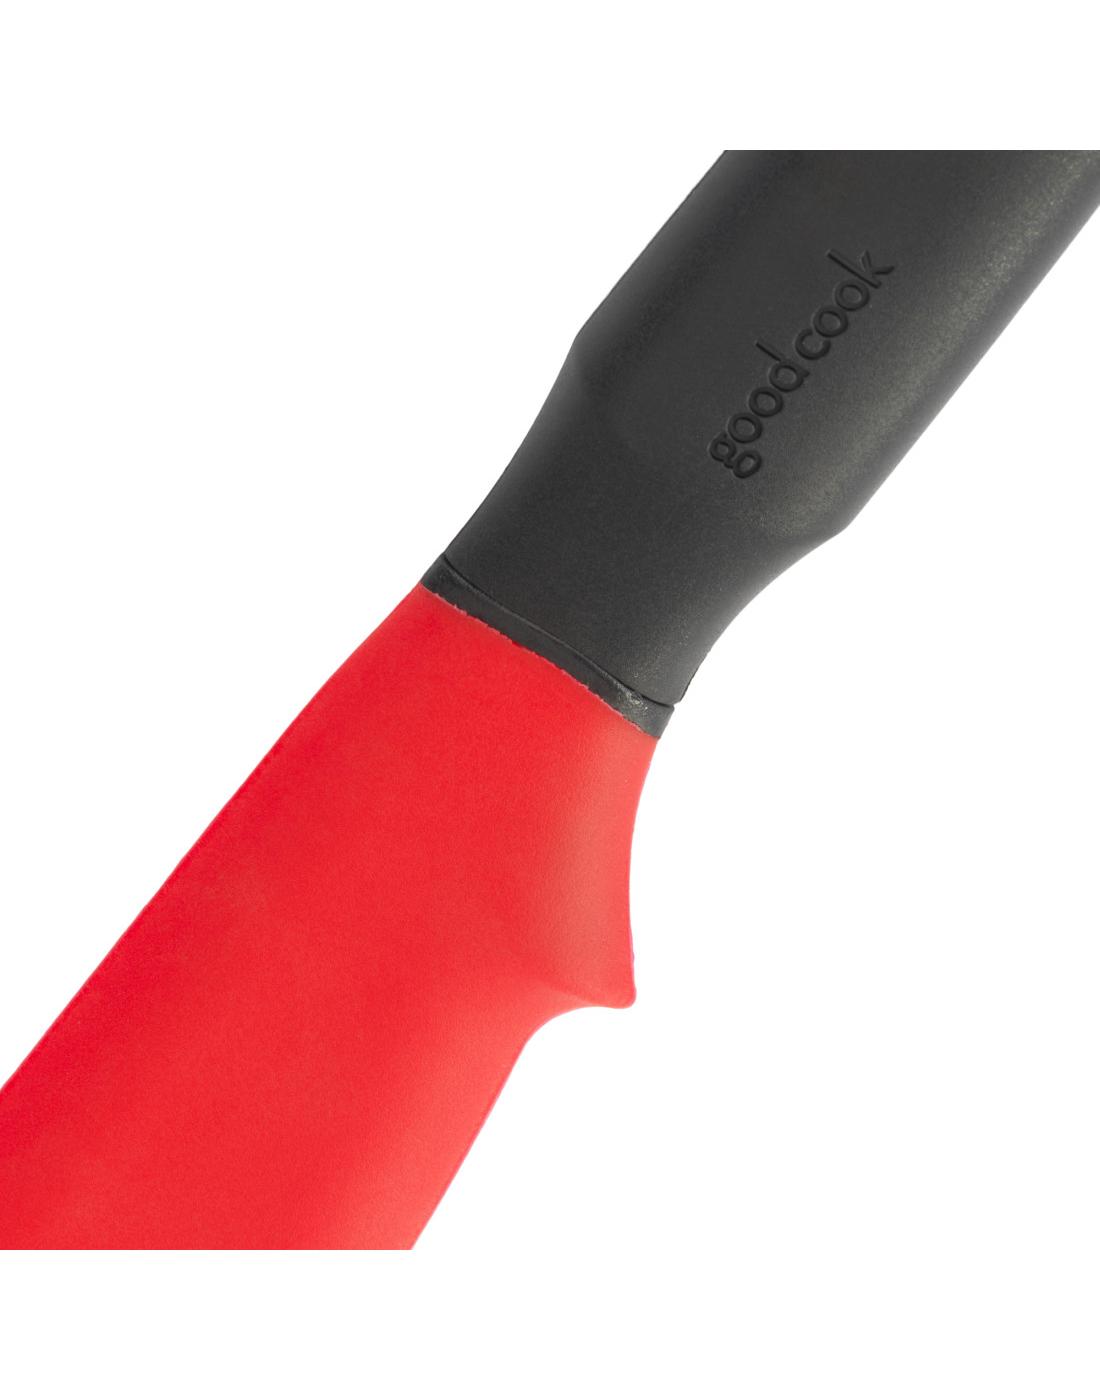 GoodCook Touch Silicone Spreader Spatula; image 3 of 4